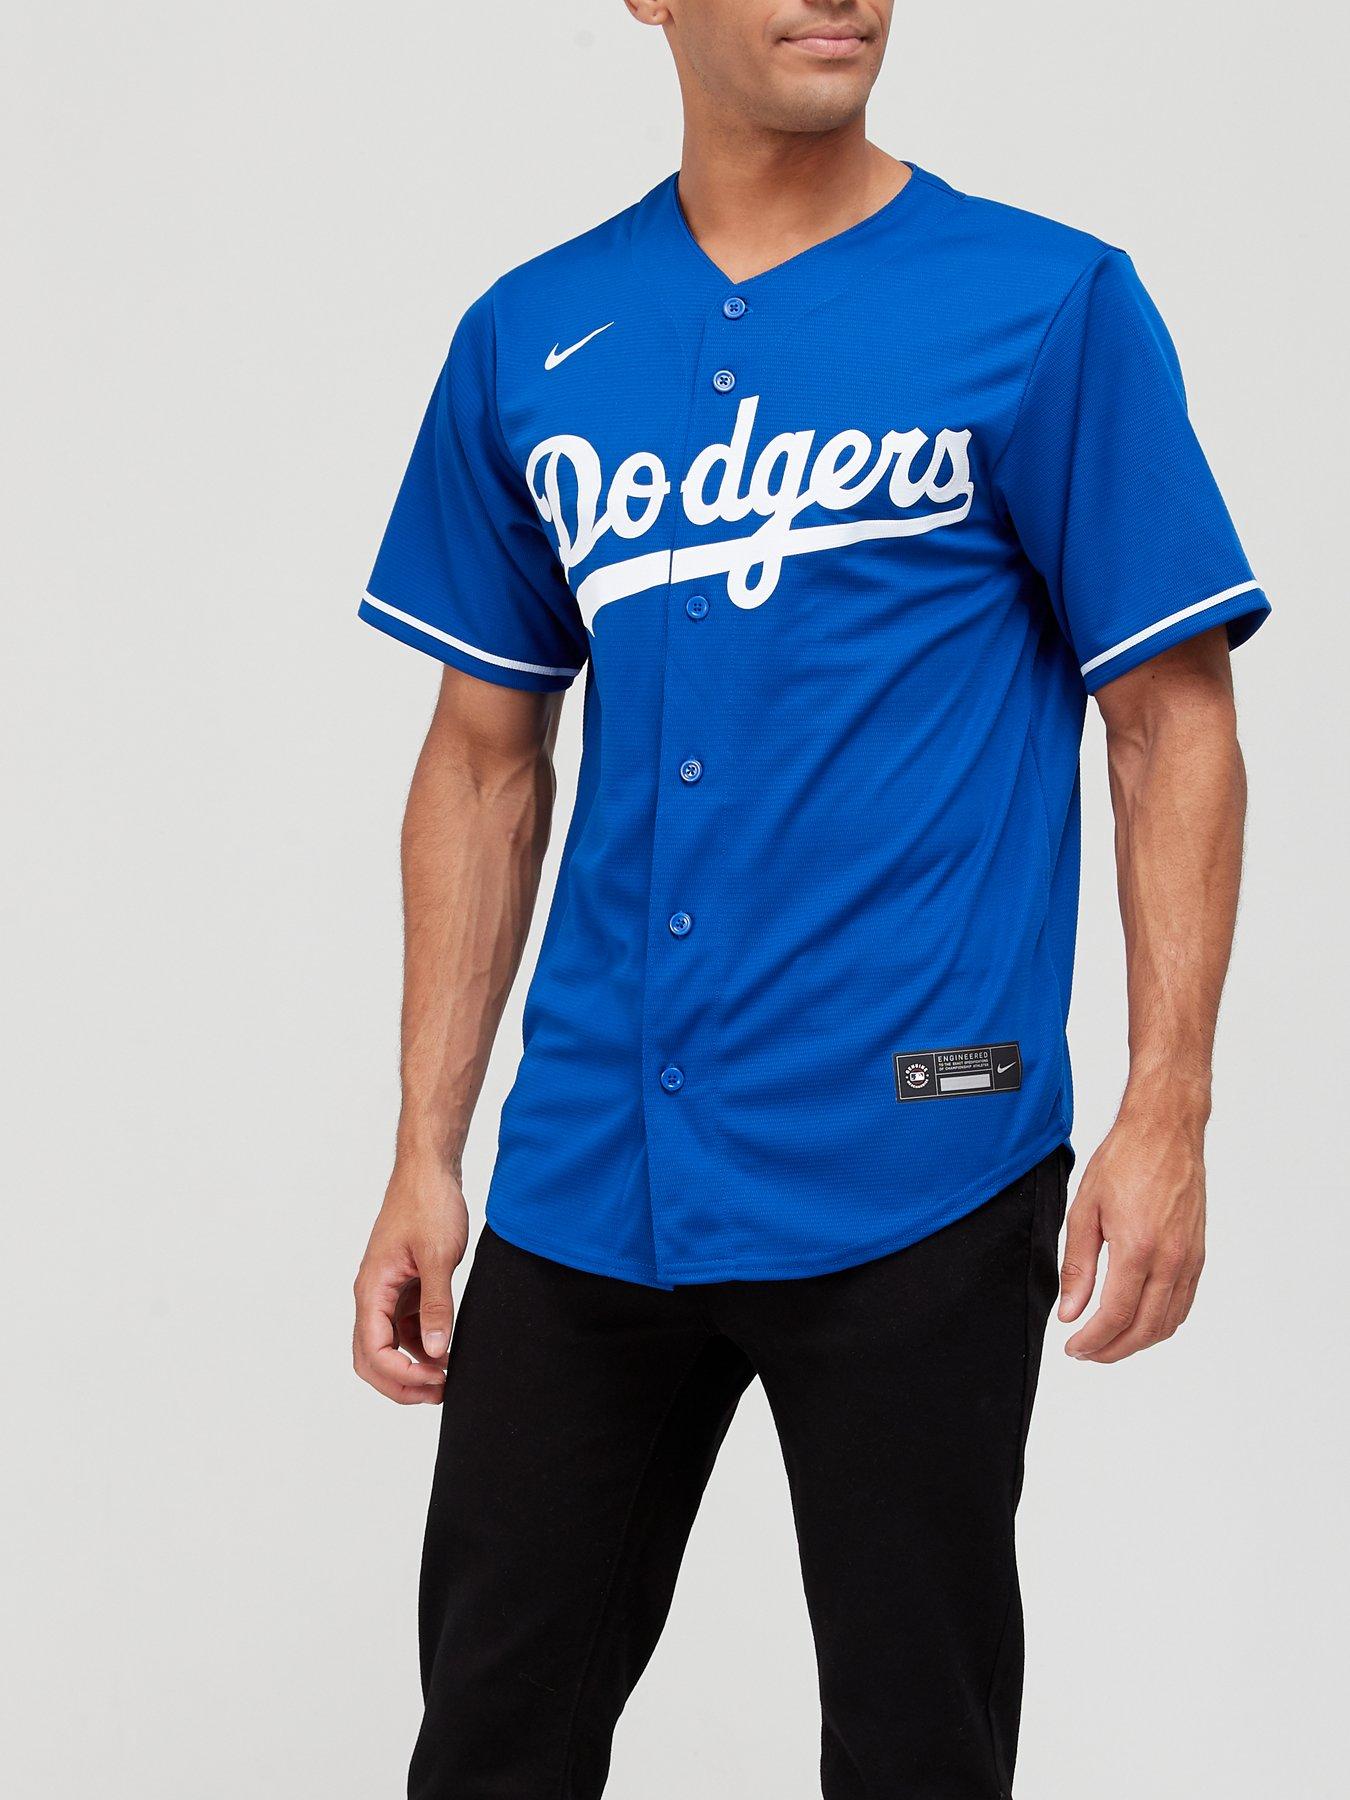 Los Angeles Dodgers Nike Official Replica Alternate Jersey - Bright Royal -  Youth